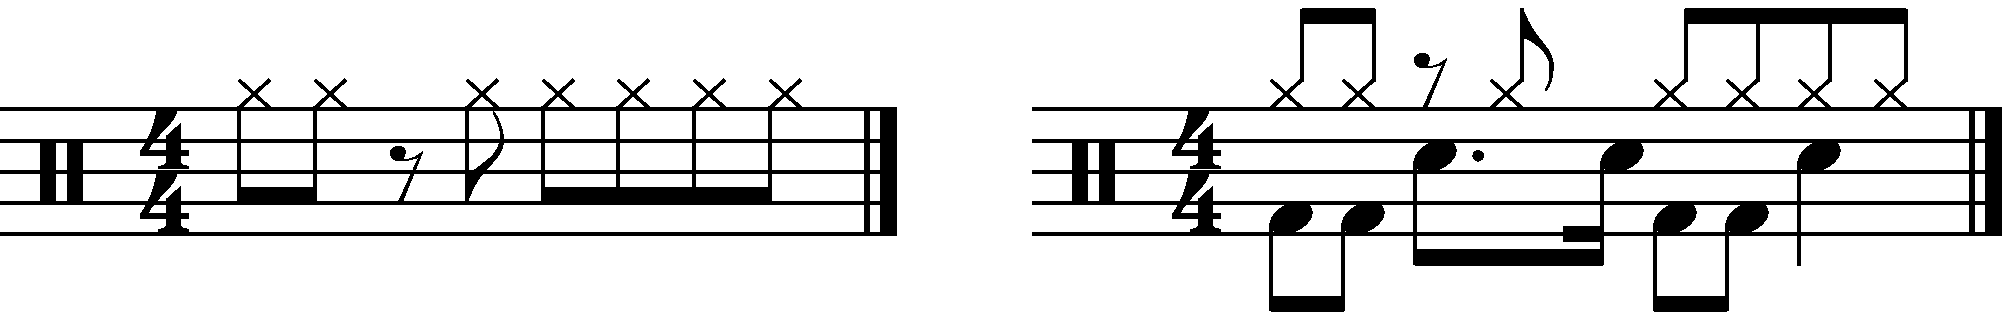 A groove with 8th note rests in the right hand